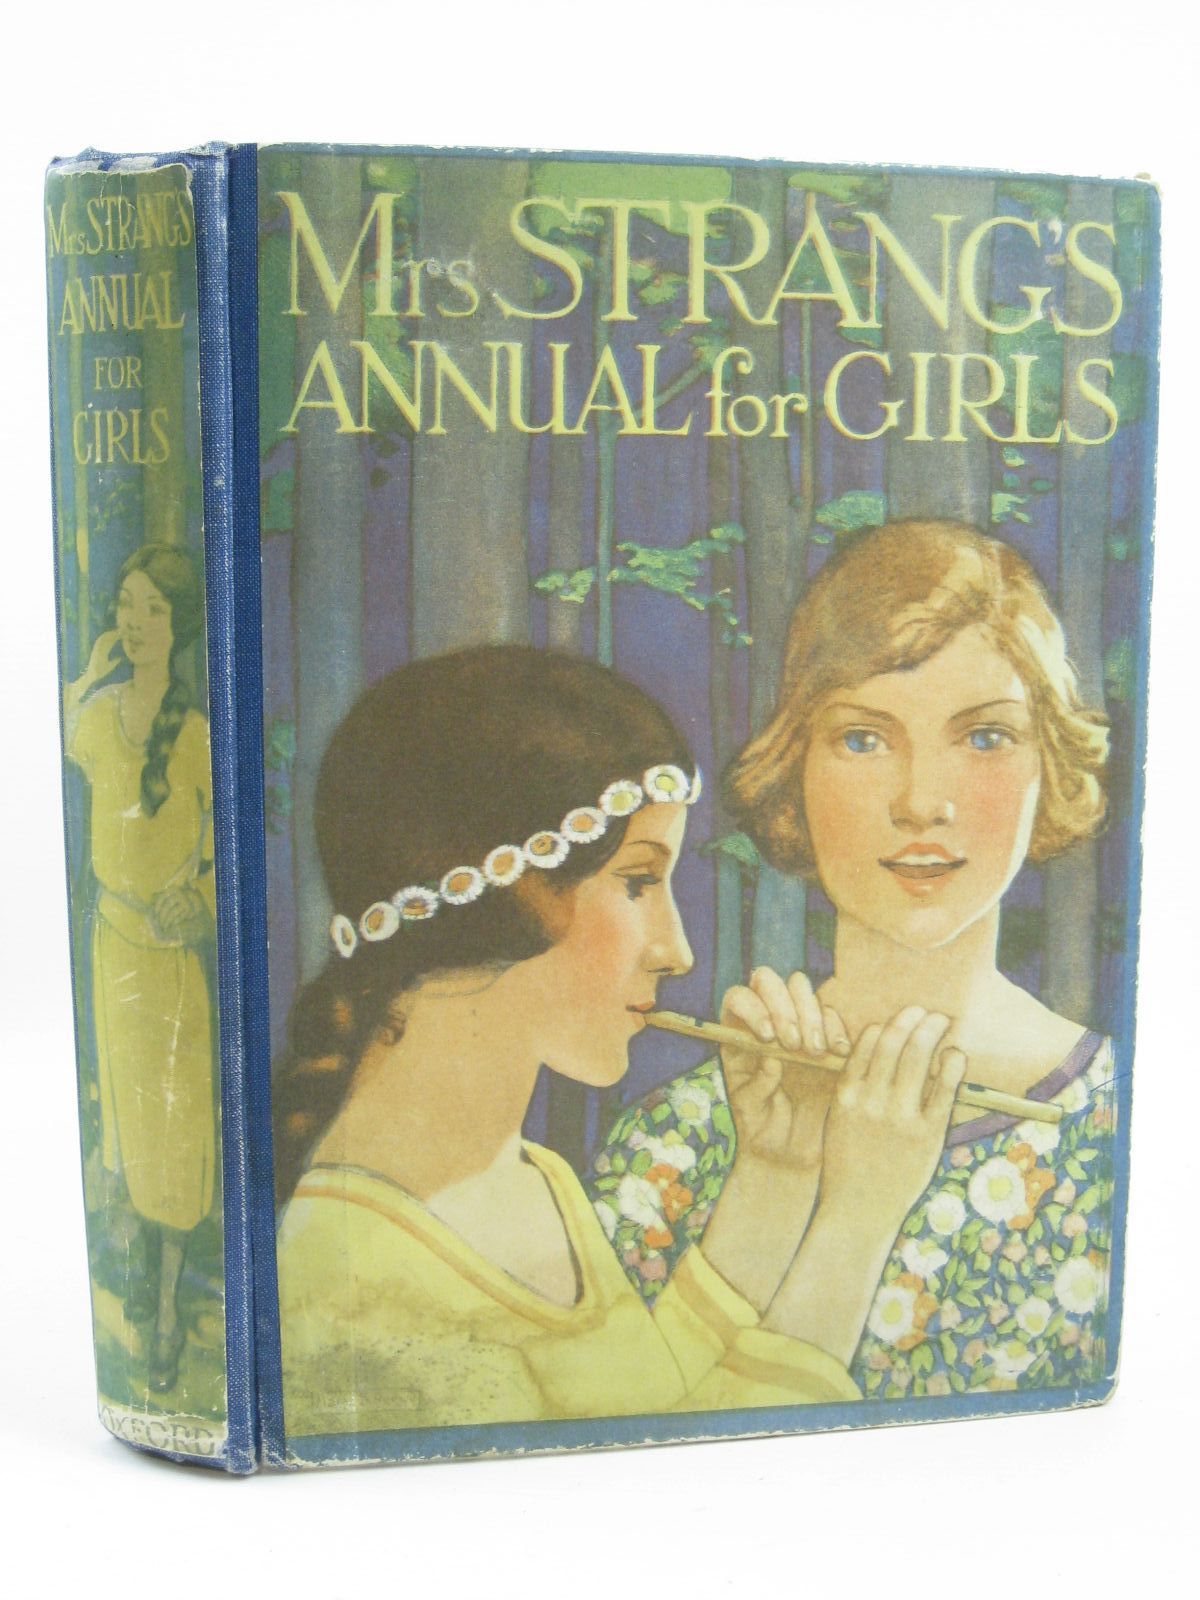 Photo of MRS. STRANG'S ANNUAL FOR GIRLS written by Francklyn, Phillippa Stowell, Thora Bruce, Dorita Fairlie Darch, Winifred et al, illustrated by Elcock, Howard K. Reeve, Mary Strange Johnston, M.D. Peart, M.A. et al., published by Humphrey Milford, Oxford University Press (STOCK CODE: 1506885)  for sale by Stella & Rose's Books